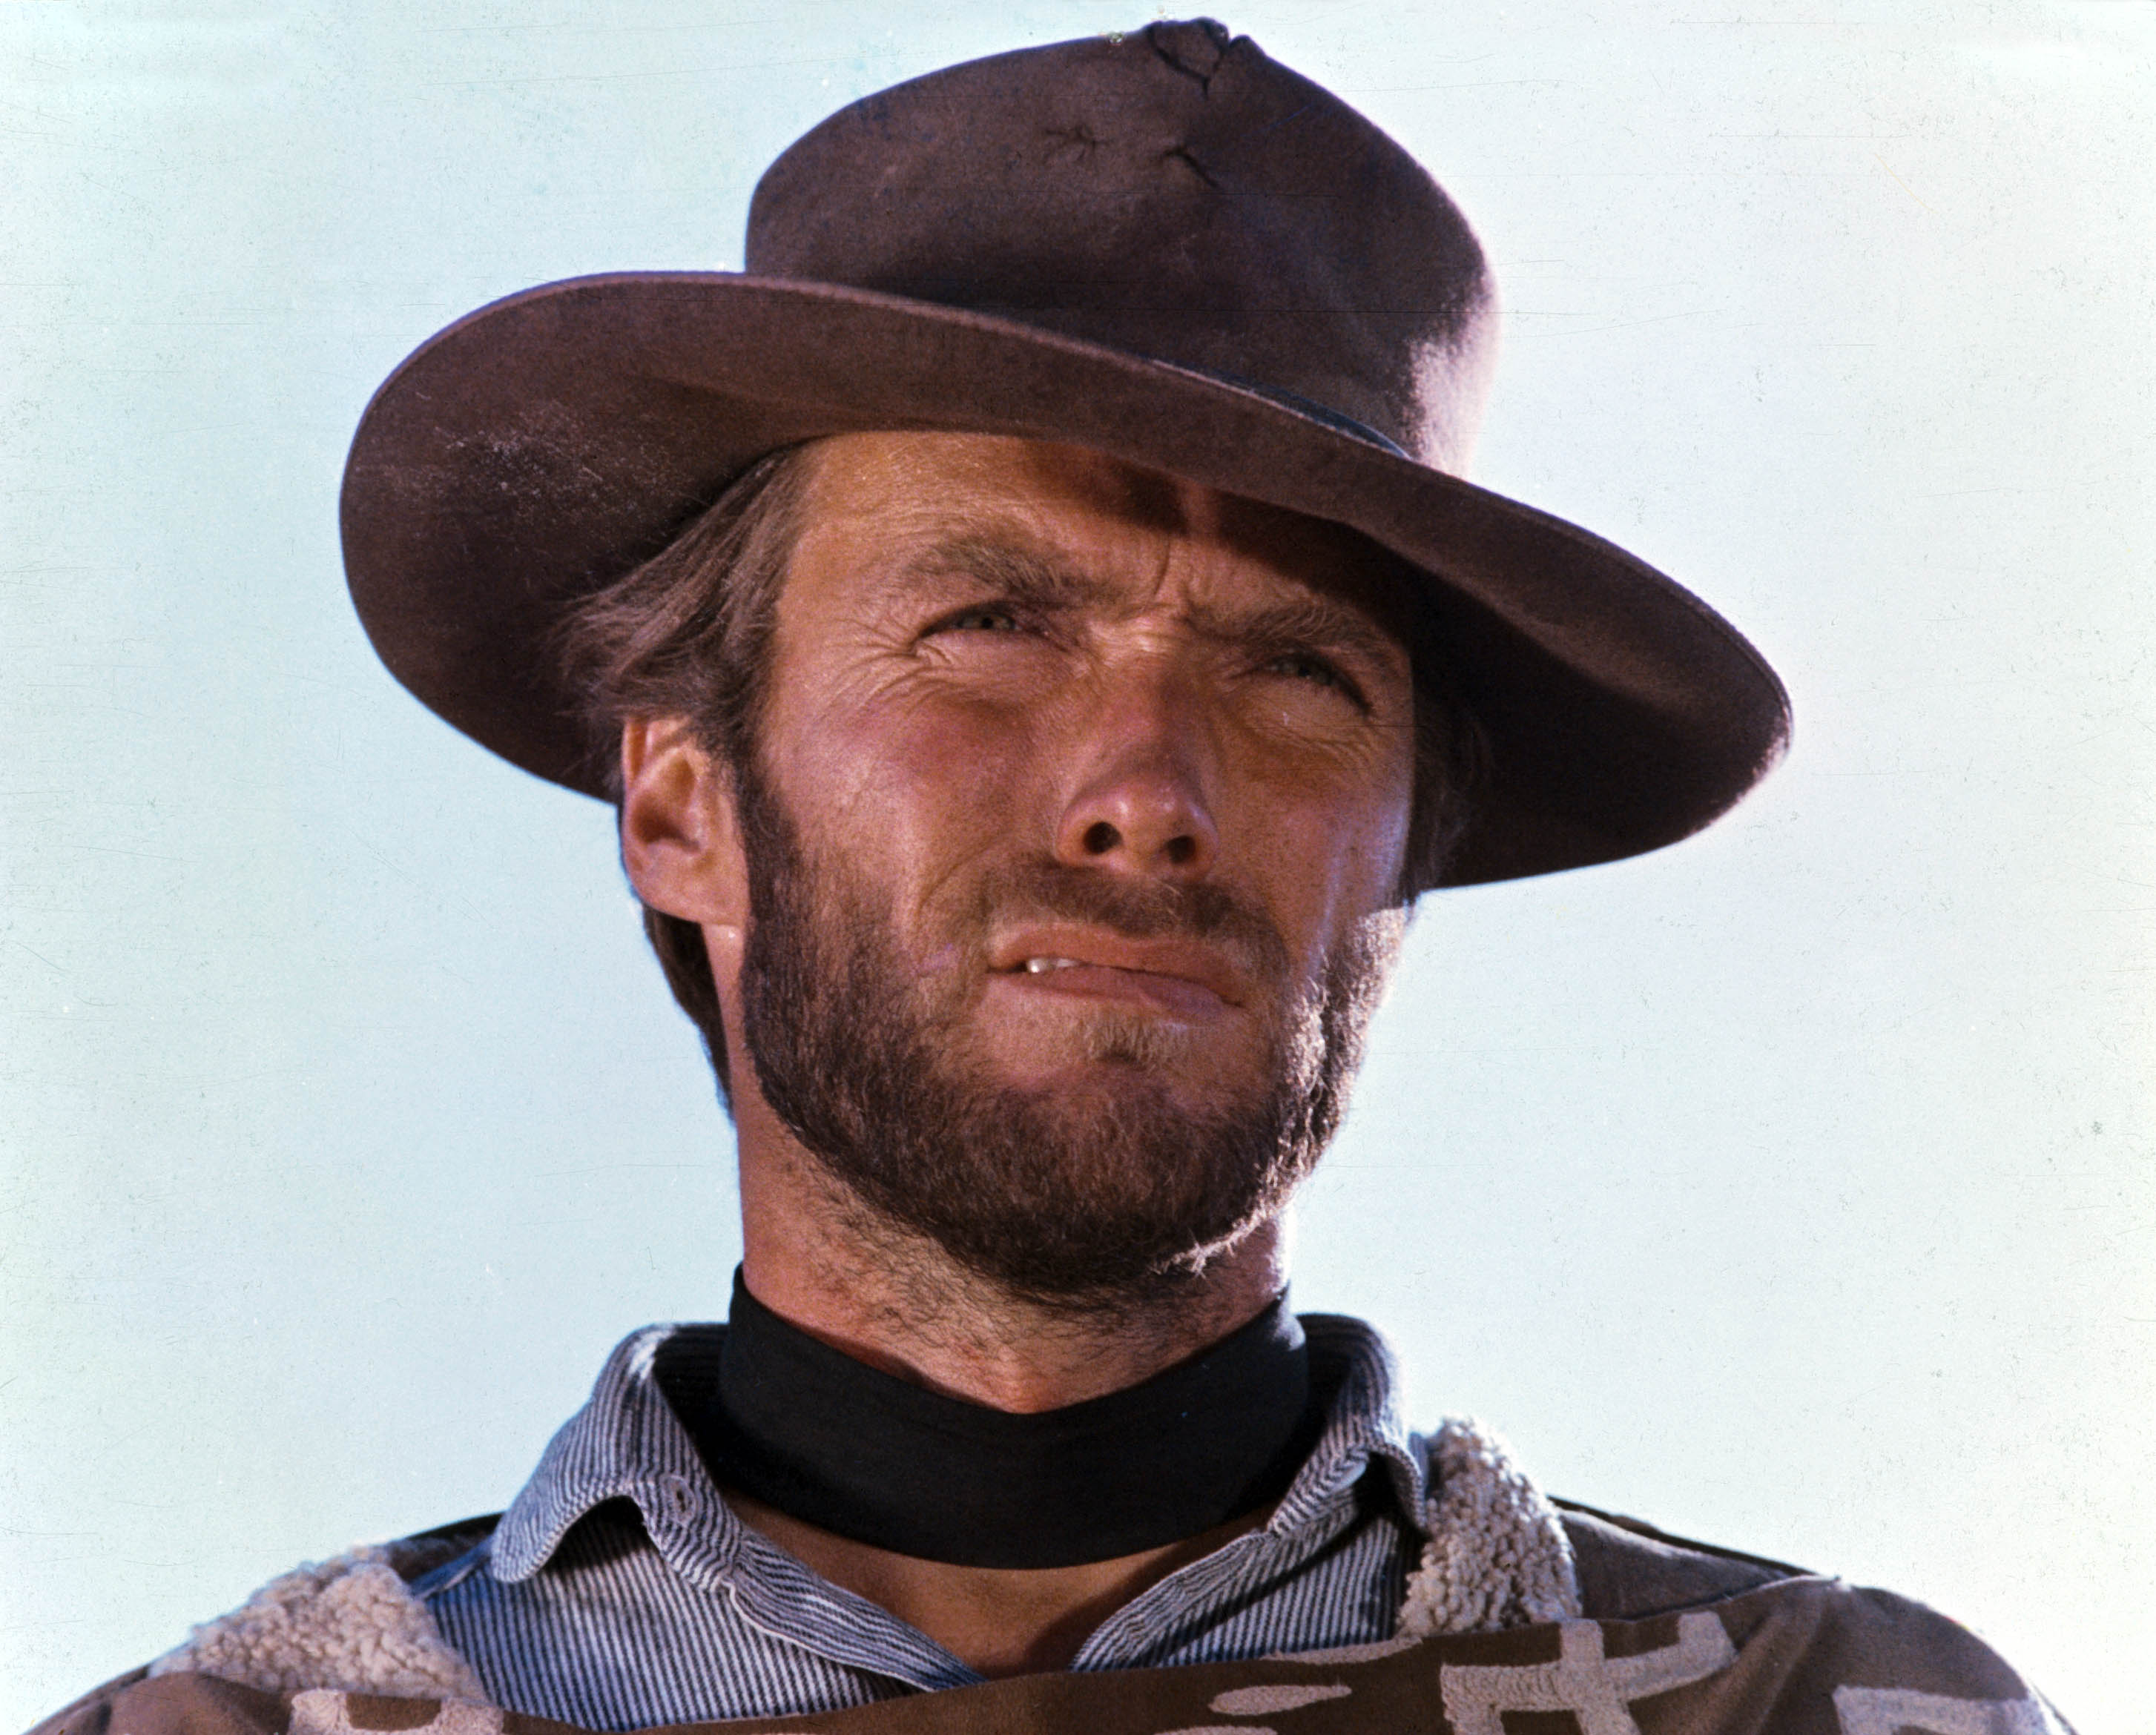 Eastwood reprising the role in ‘The Good, the Bad and the Ugly'